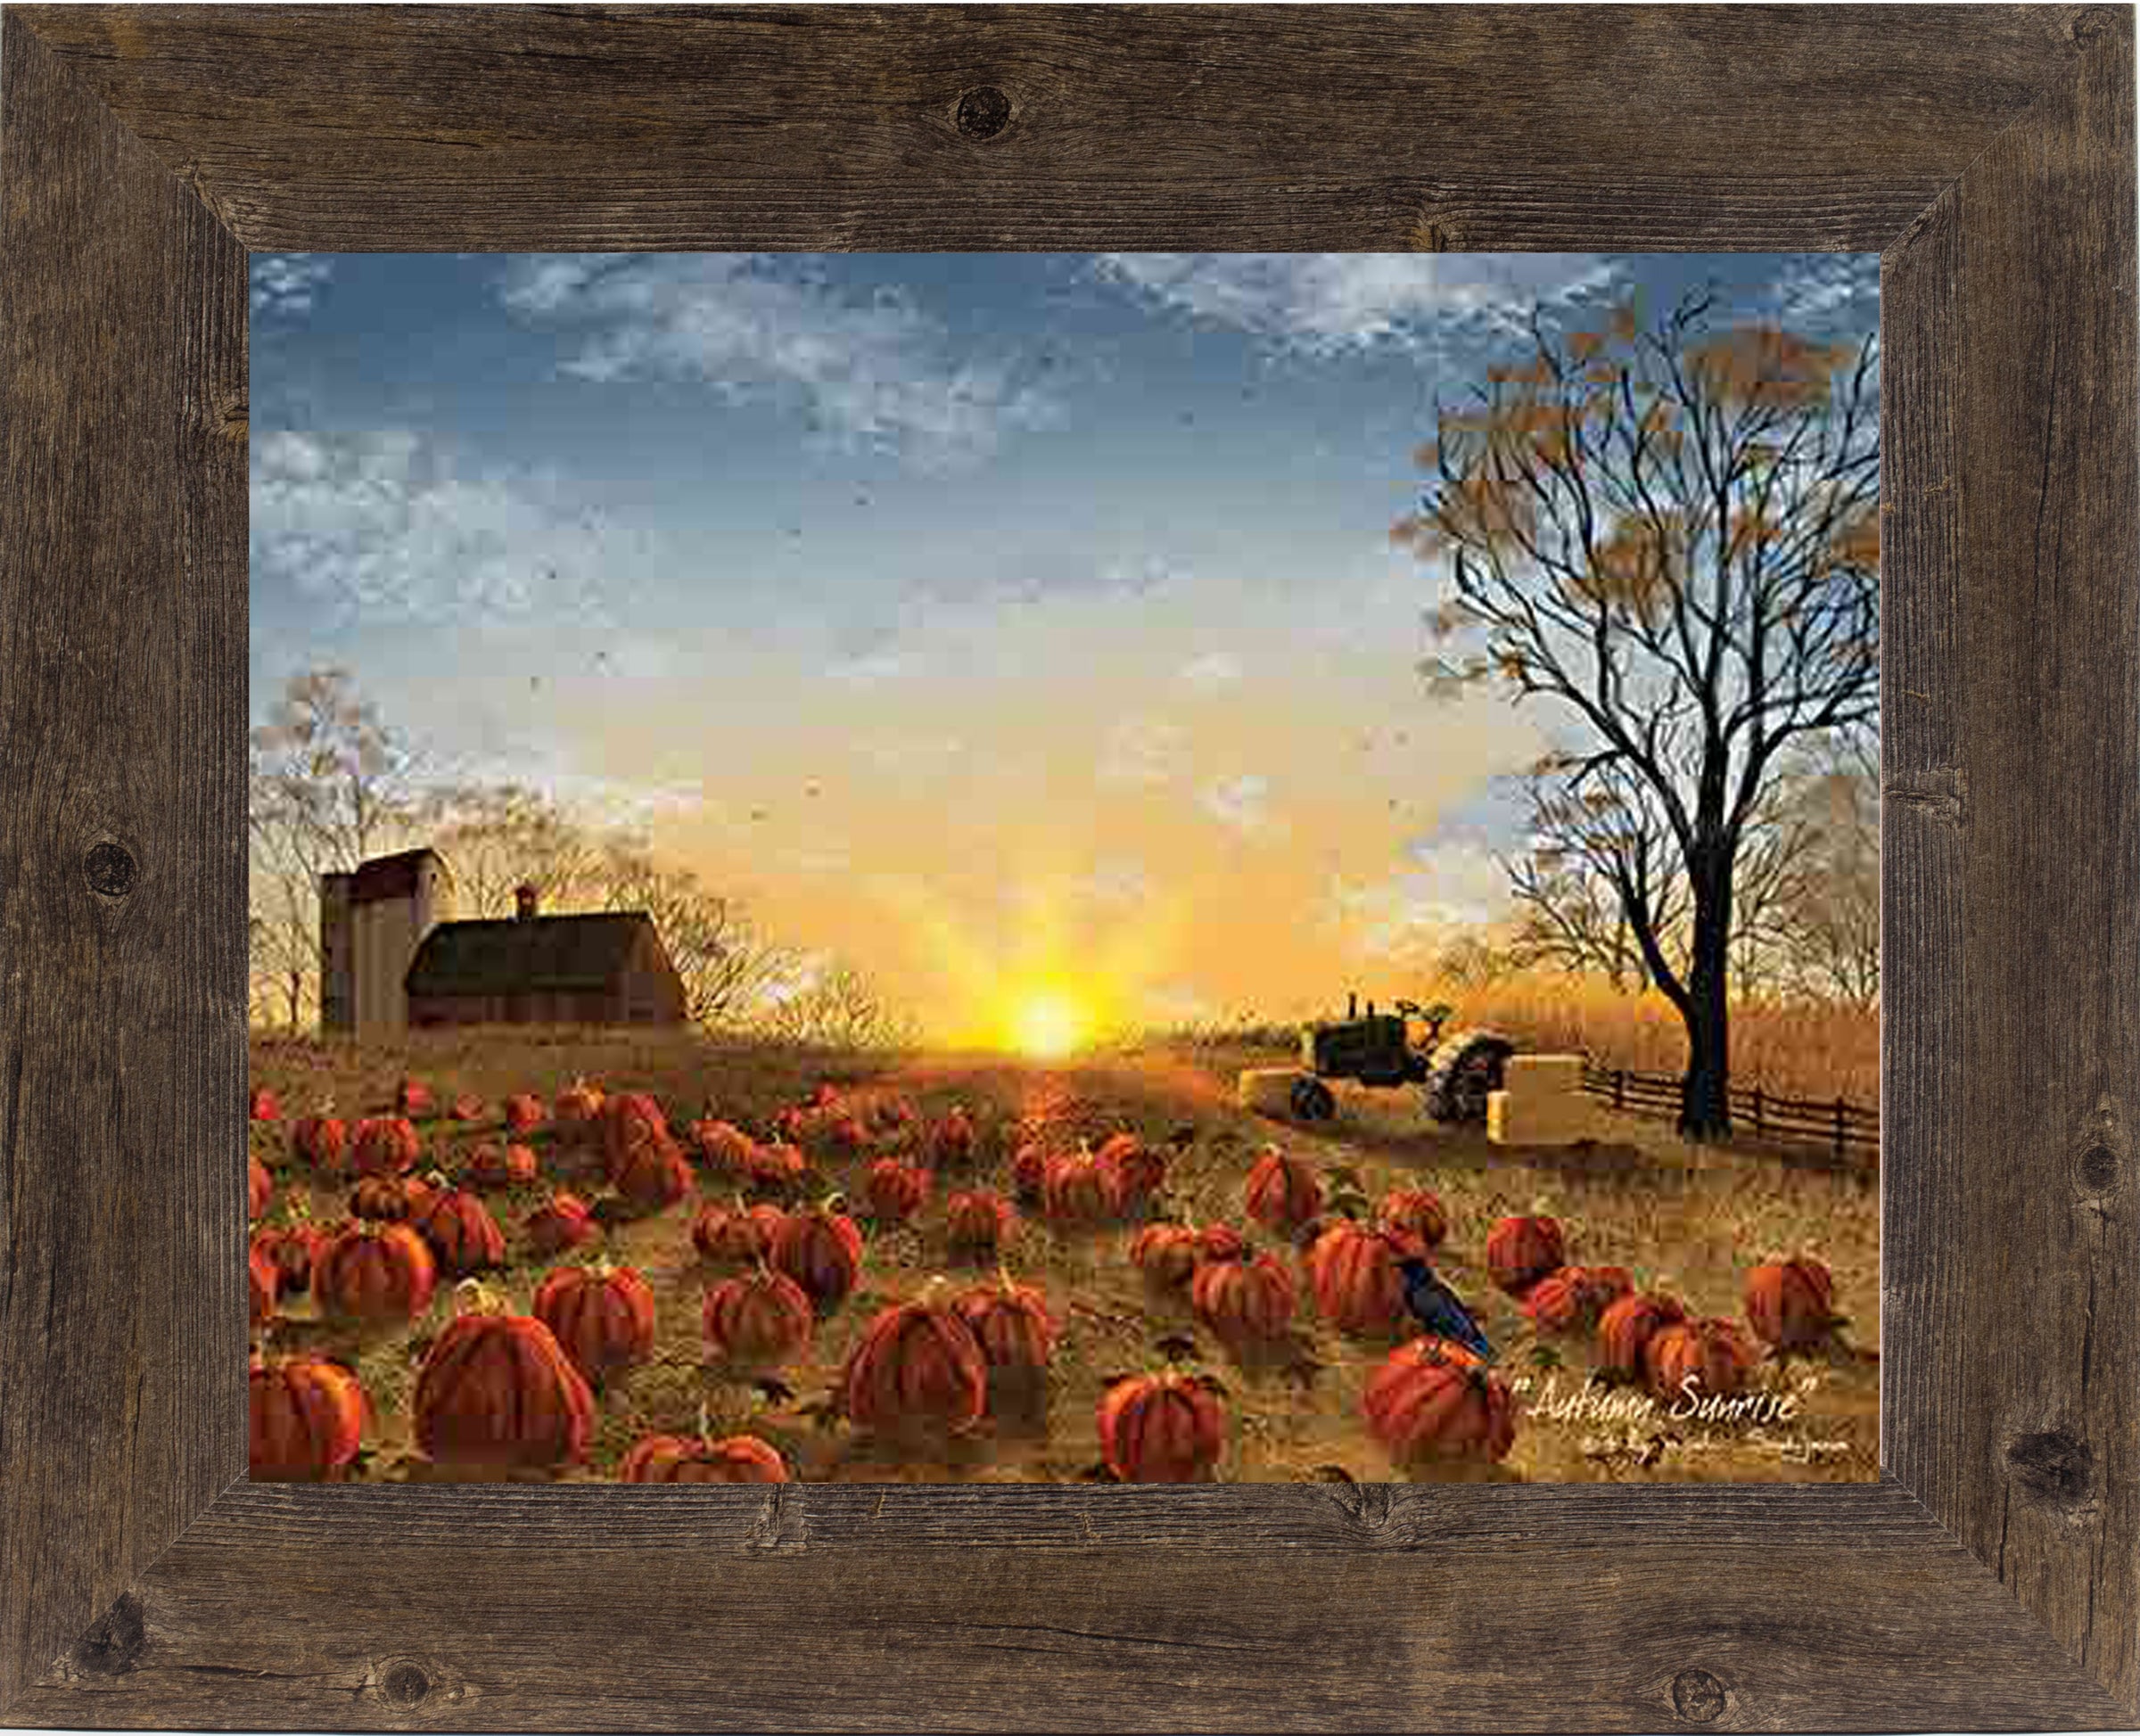 Autumn Sunrise by Billy Jacobs BJ1323